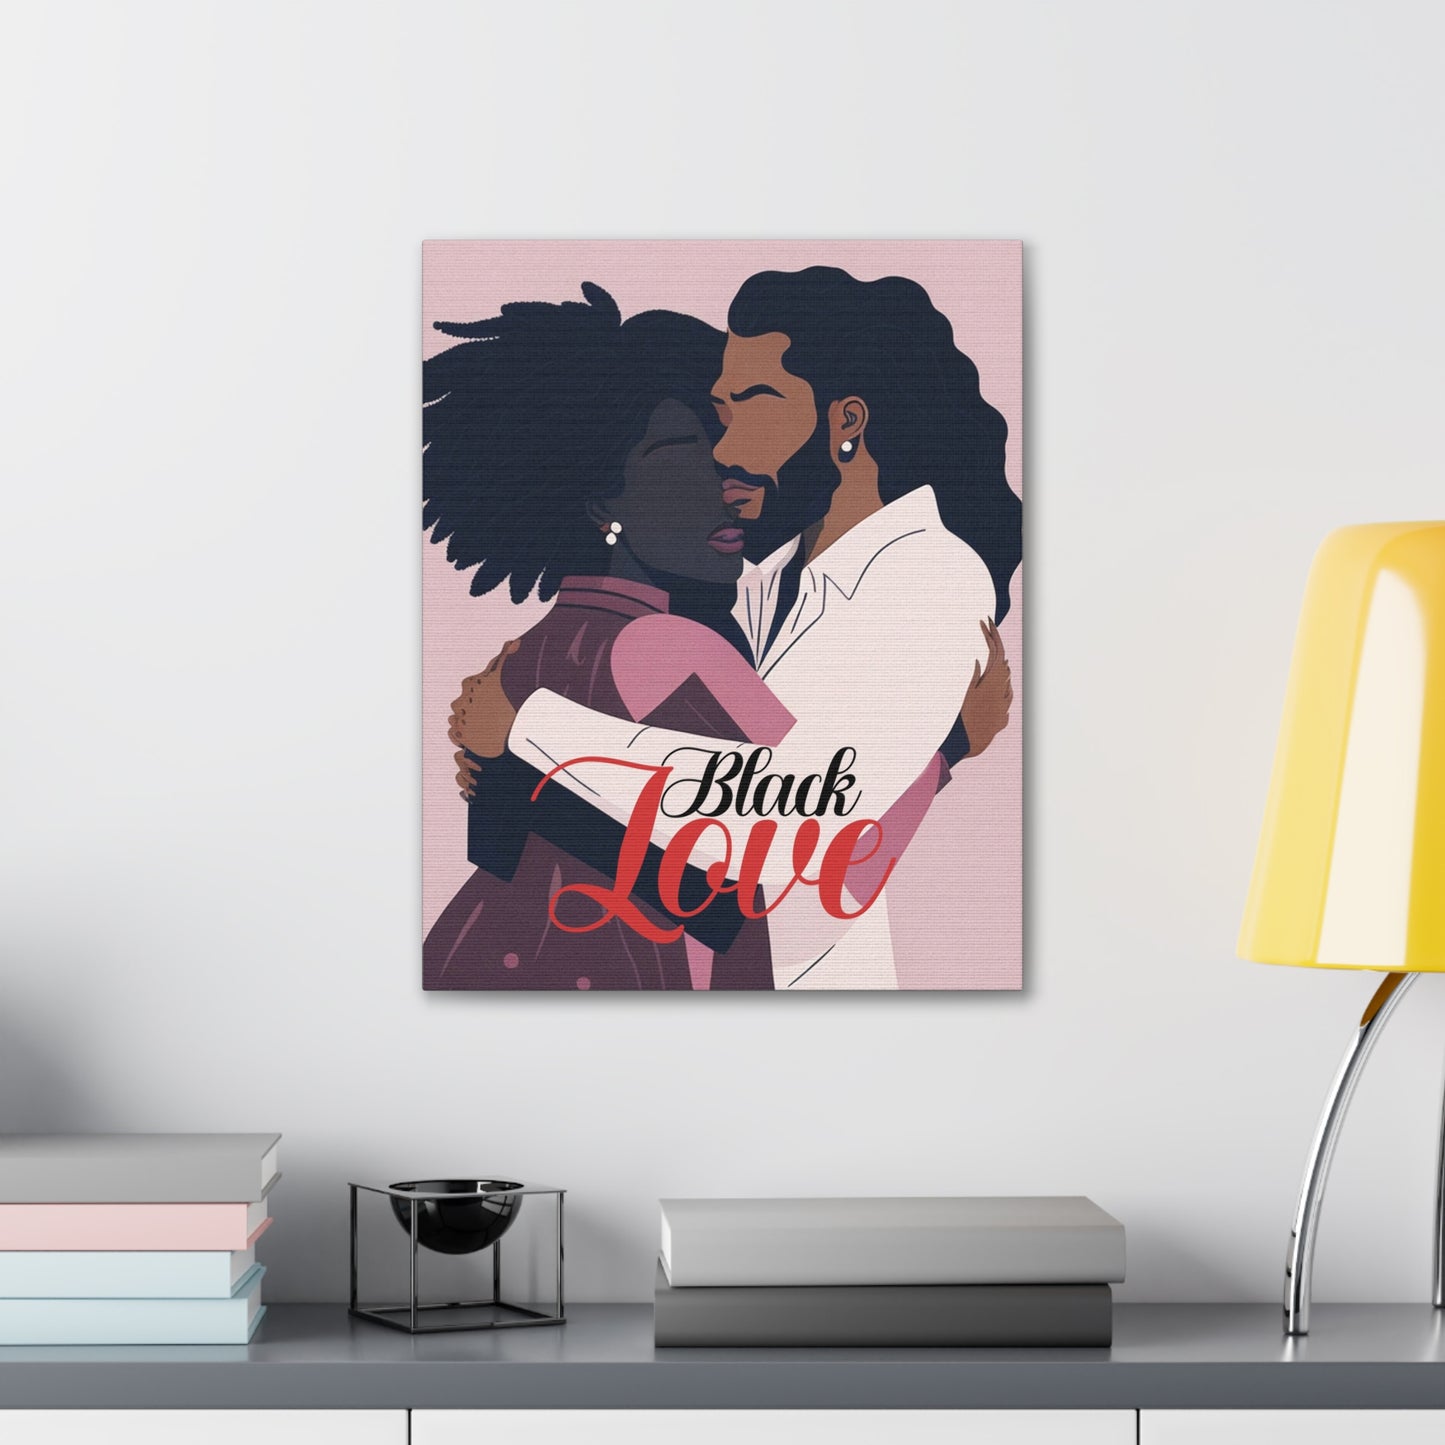 Together Forever Black Love Canvas Art | 16"x20" Romantic Afrocentric Wall Decor